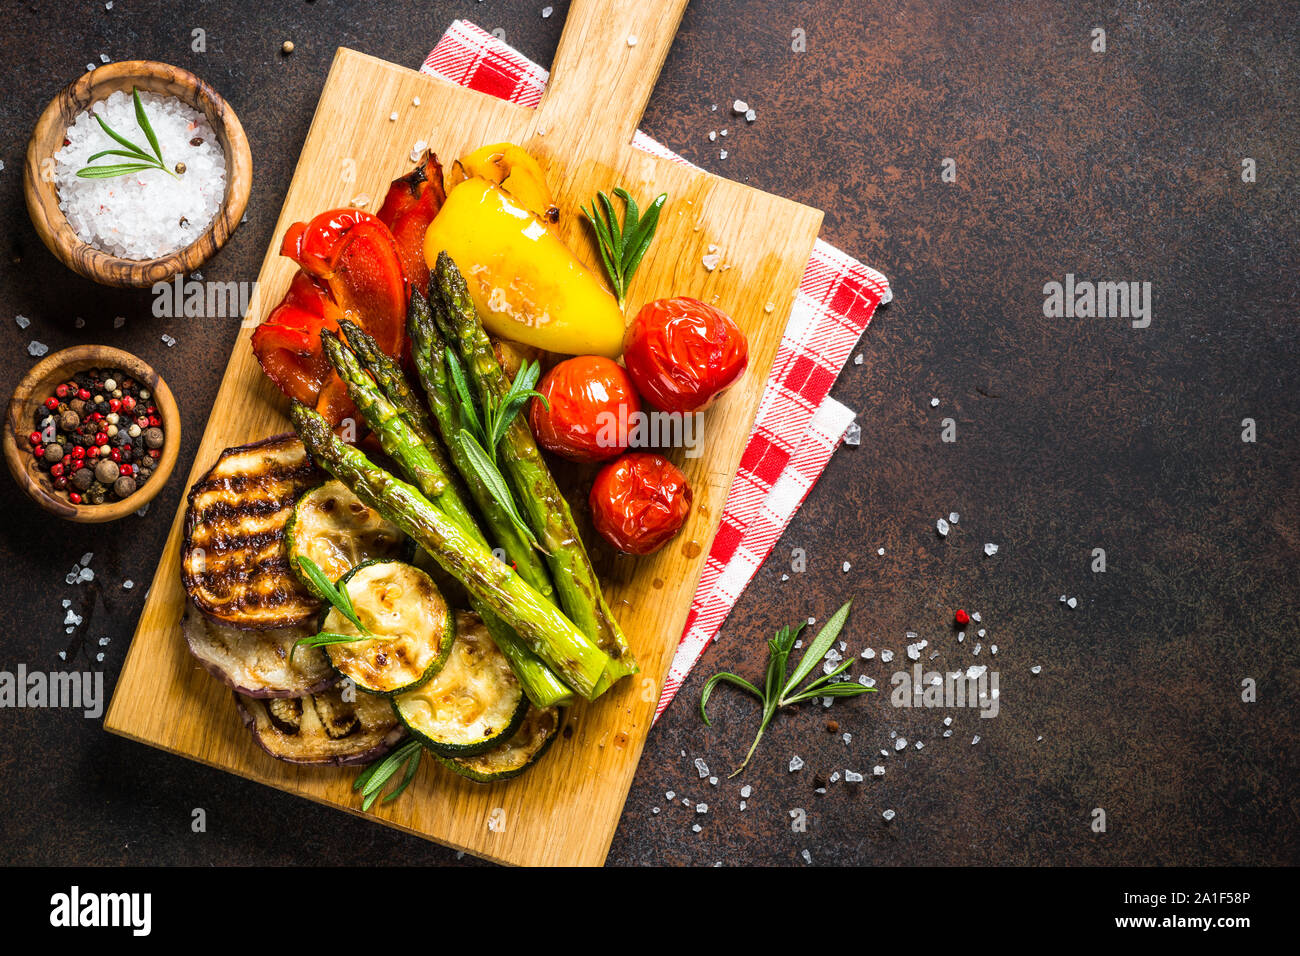 Grilled vegetables - zucchini, paprika, eggplant, asparagus and tomatoes. Stock Photo